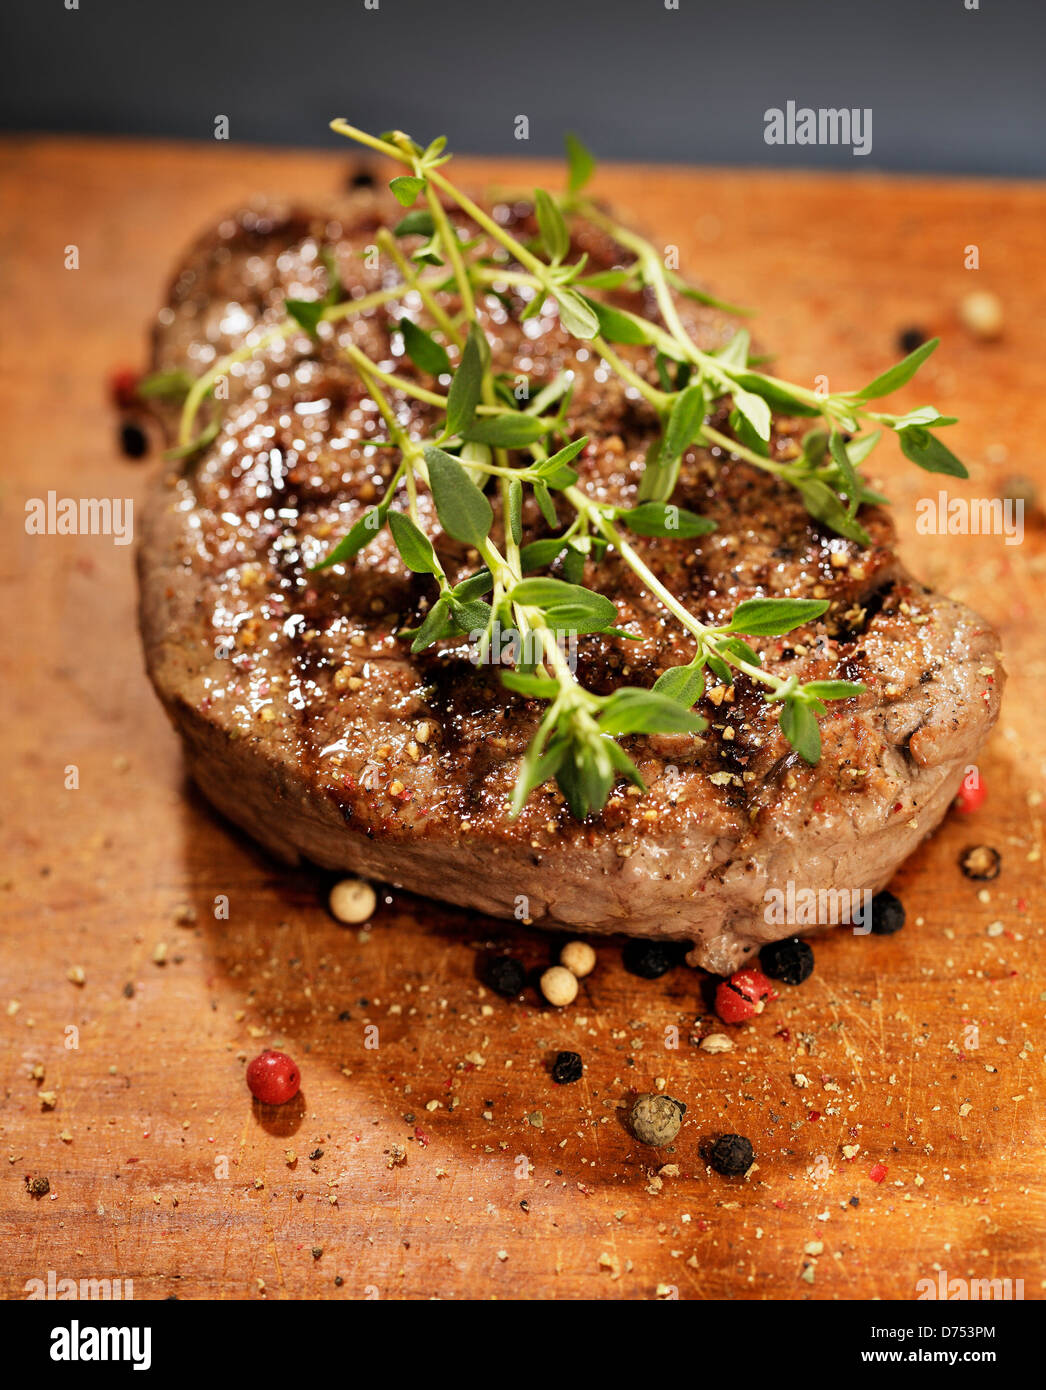 Fried beef tenderloin steak with thyme and peppers. Stock Photo